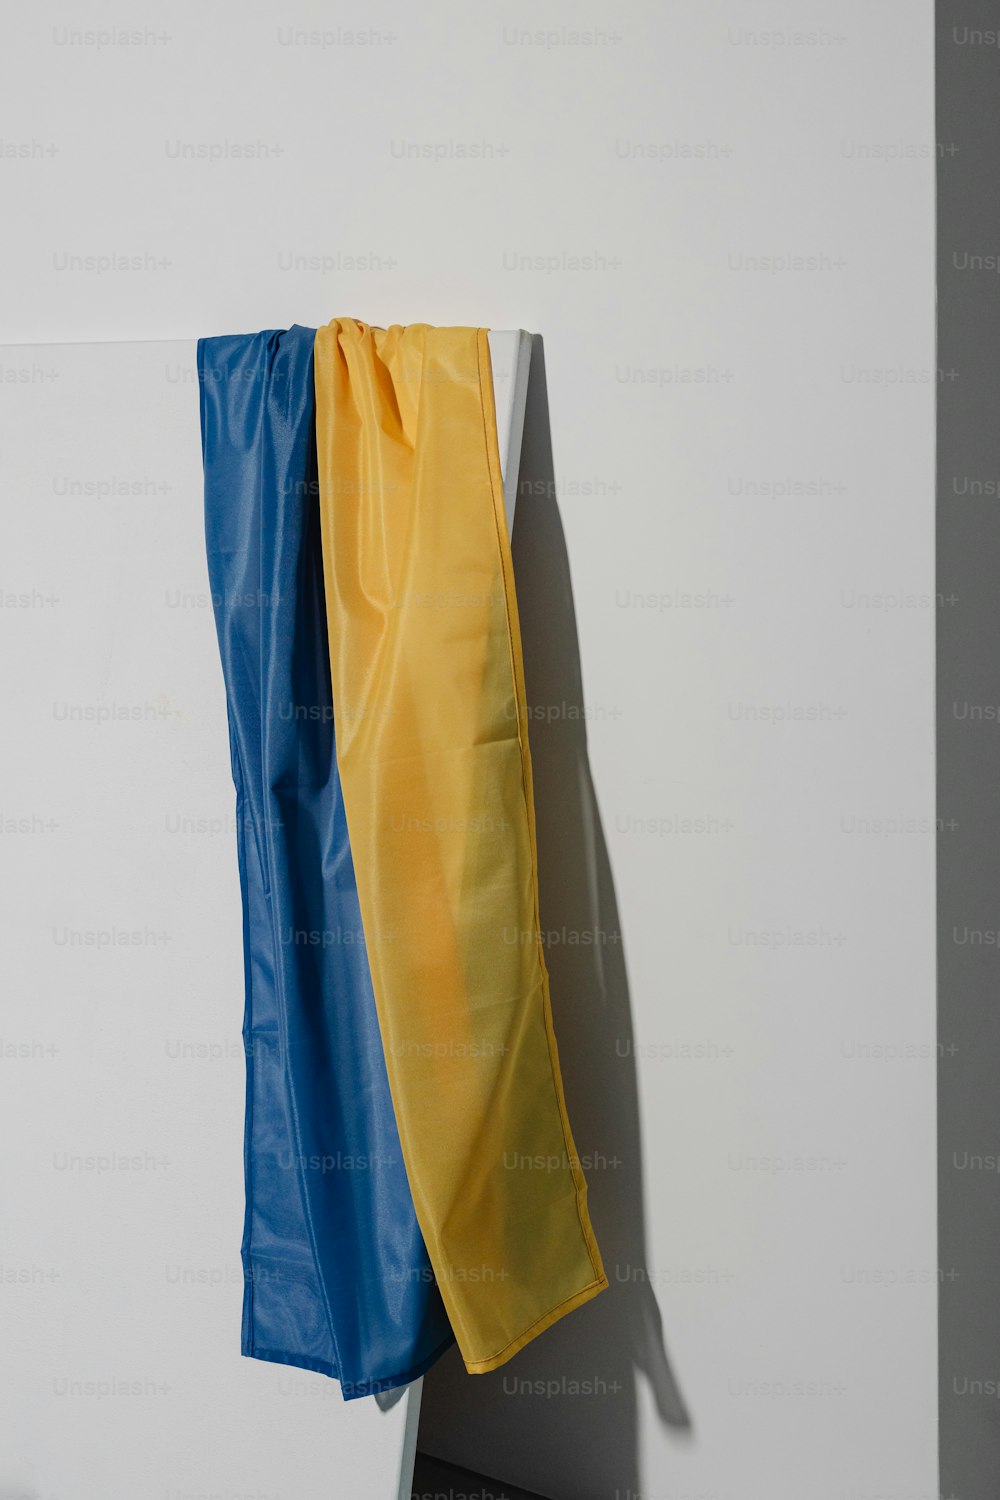 a yellow and blue piece of cloth hanging on a wall